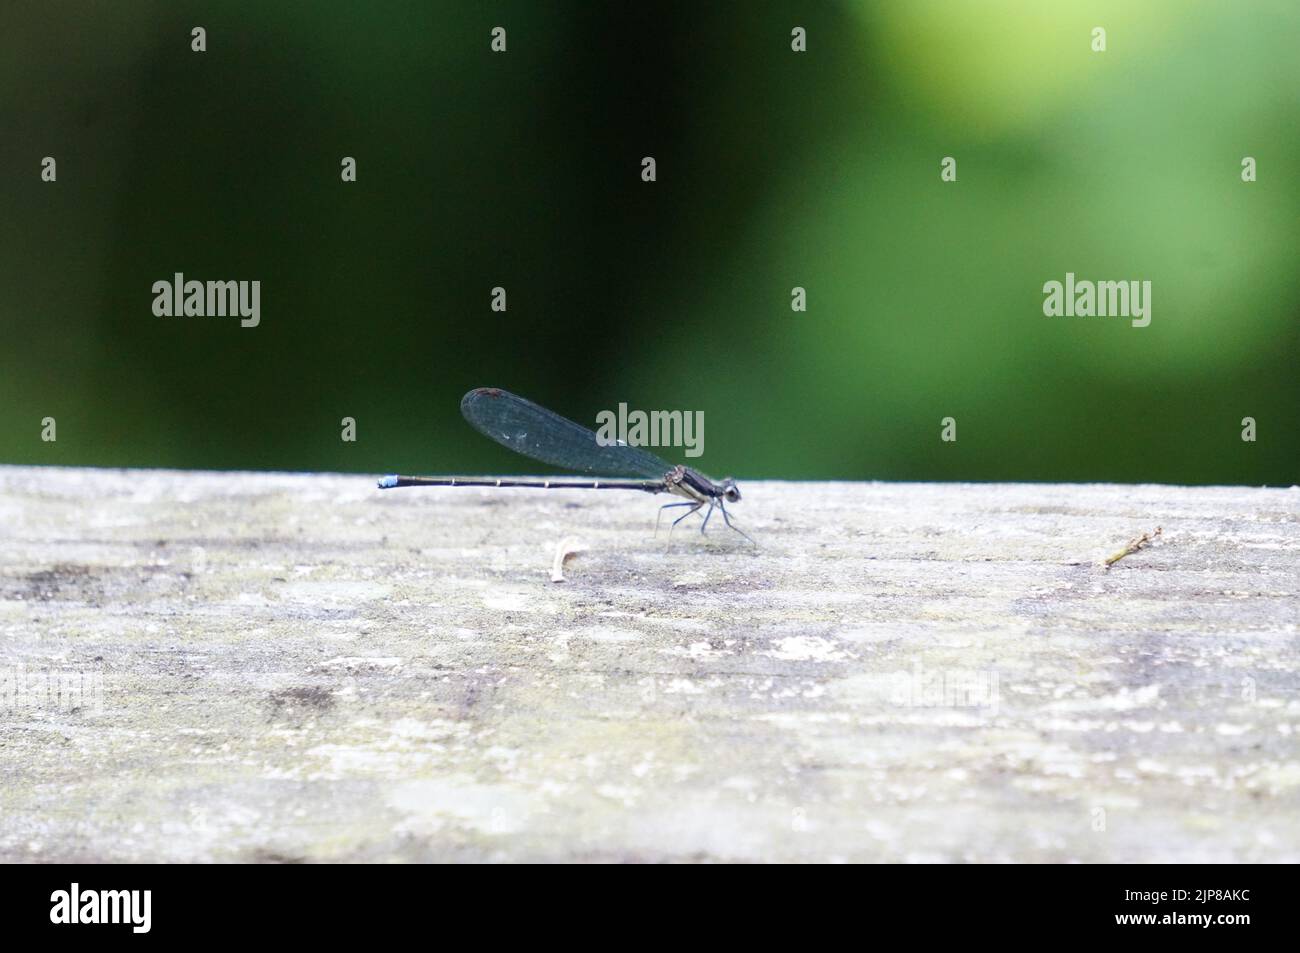 The close-up view of a dusky dancer insect on the gray surface Stock Photo